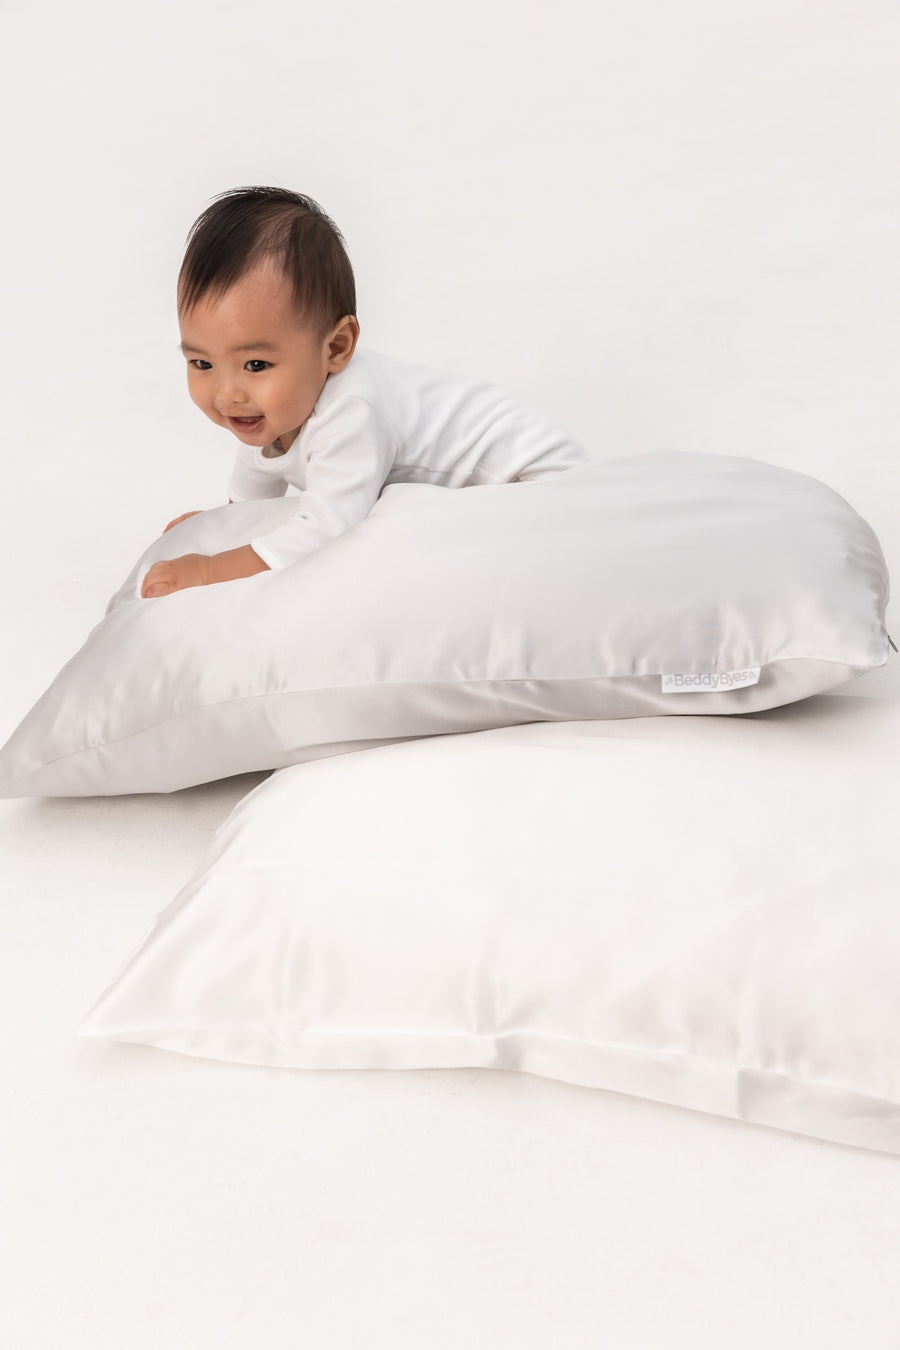 smiley toddler boy plays with a pillow covered with a beddybyes silver grey Silk Queen Pillowcase